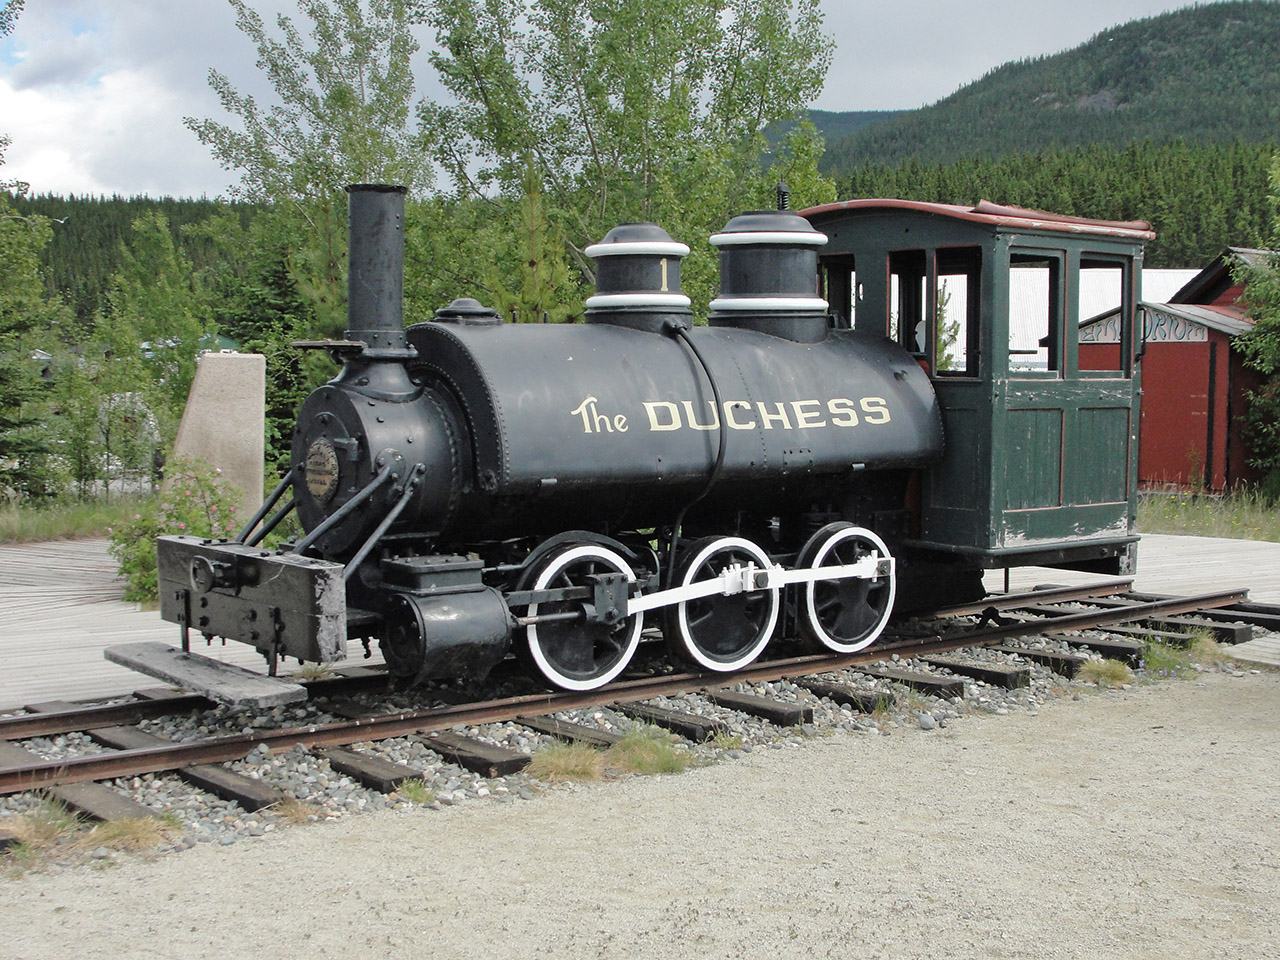 Displayed beside the WP&YR station at Carcross, Yukon Territory
"The Duchess" is a saddle tank loco built by Baldwin in 1878 as an 0-6-0 for a Vancouver Island coal mine that had 30" track gauge.  Sources indicate that the front coupling rods were removed in 1883 turning it into a 2-4-0, and it has been that way ever since.  Around 1889 it was re-gauged for 36" track. 
In the past, the main travel corridors of Yukon Territory were its lakes and rivers, which WP&YR connected with.  In 1900 Duchess was acquired to power the Atlin Short Line Railway (a.k.a. Taku Tram), replacing horses, and the line became a White Pass & Yukon property that same year.  It pulled a single coach on the 2 mile inter-lake portage between docks at the east of Taku Arm off Taglish Lake and Scotia Bay on Atlin Lake BC - in the other direction it pushed.   After a 20 year career it was retired and shipped back to Carcross YT, where it's boiler  at times served as a trash incinerator, until the engine was put on display in 1931."The Duchess" was cosmetically restored a few years ago, including a new wooden cab.